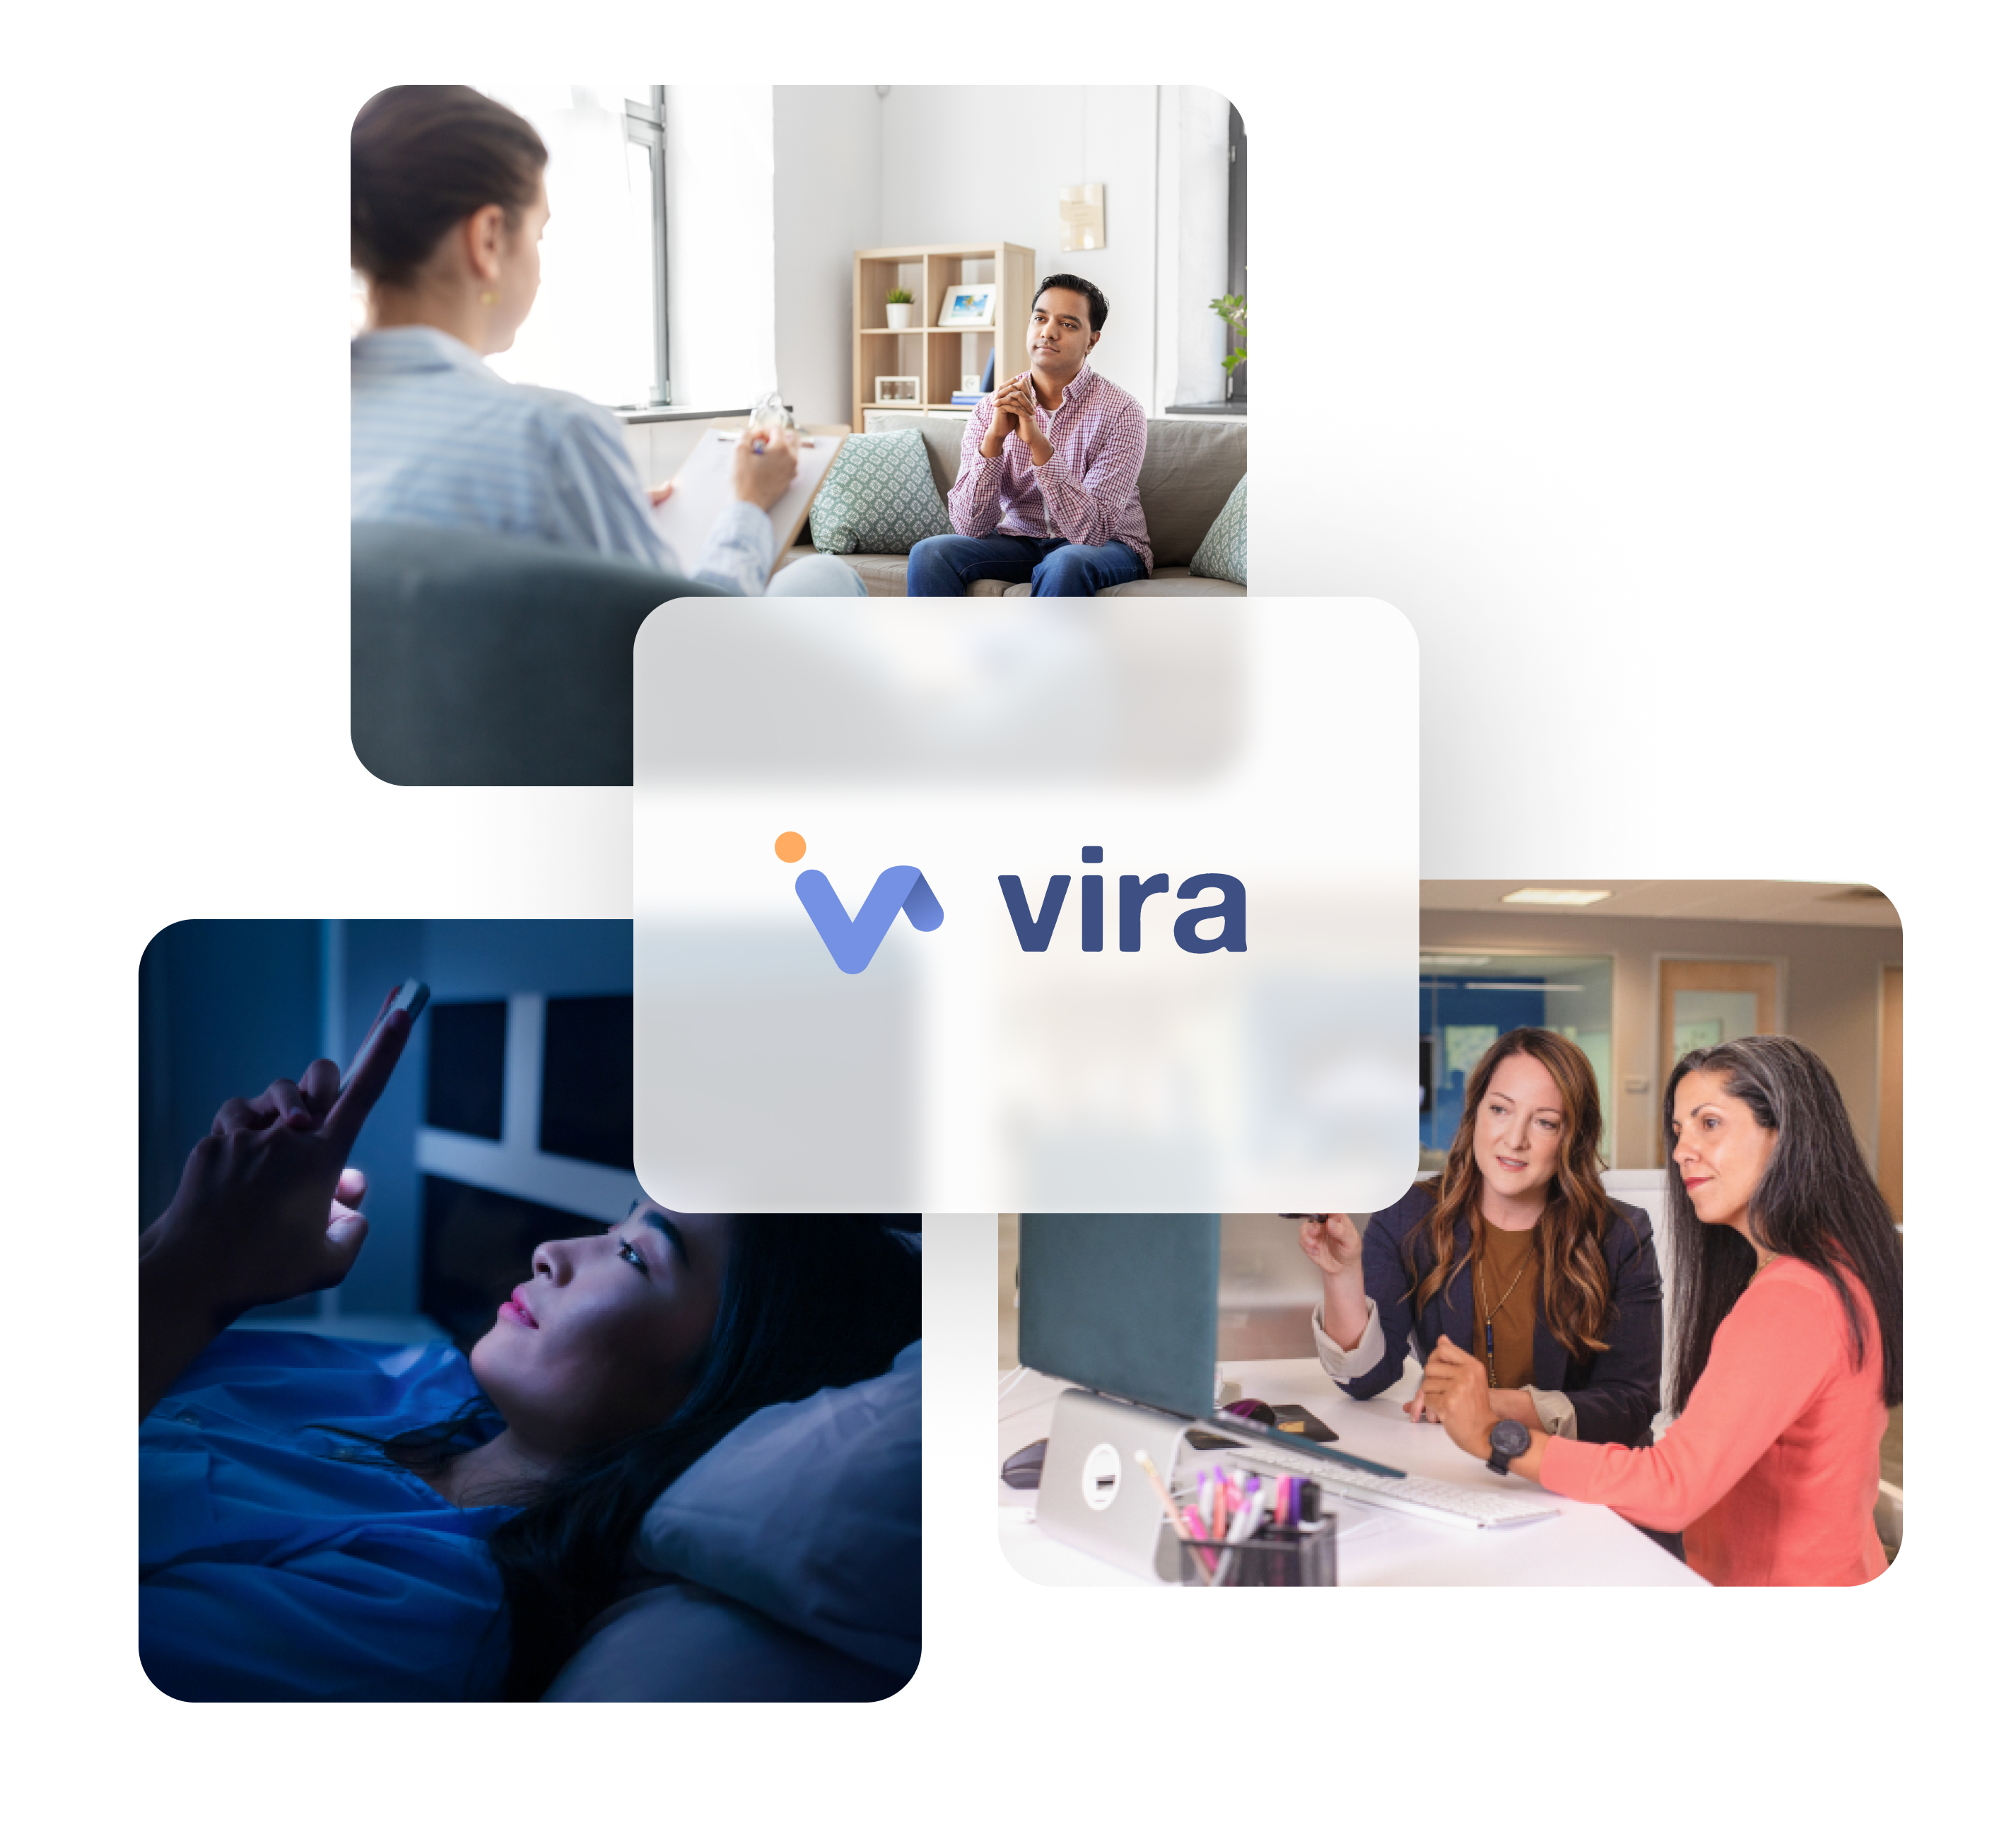 Ksana vira app image collage showing two people in a therapy session, two practitioners looking at results on a computer monitor, and a woman looking at her phone while lying in bed.